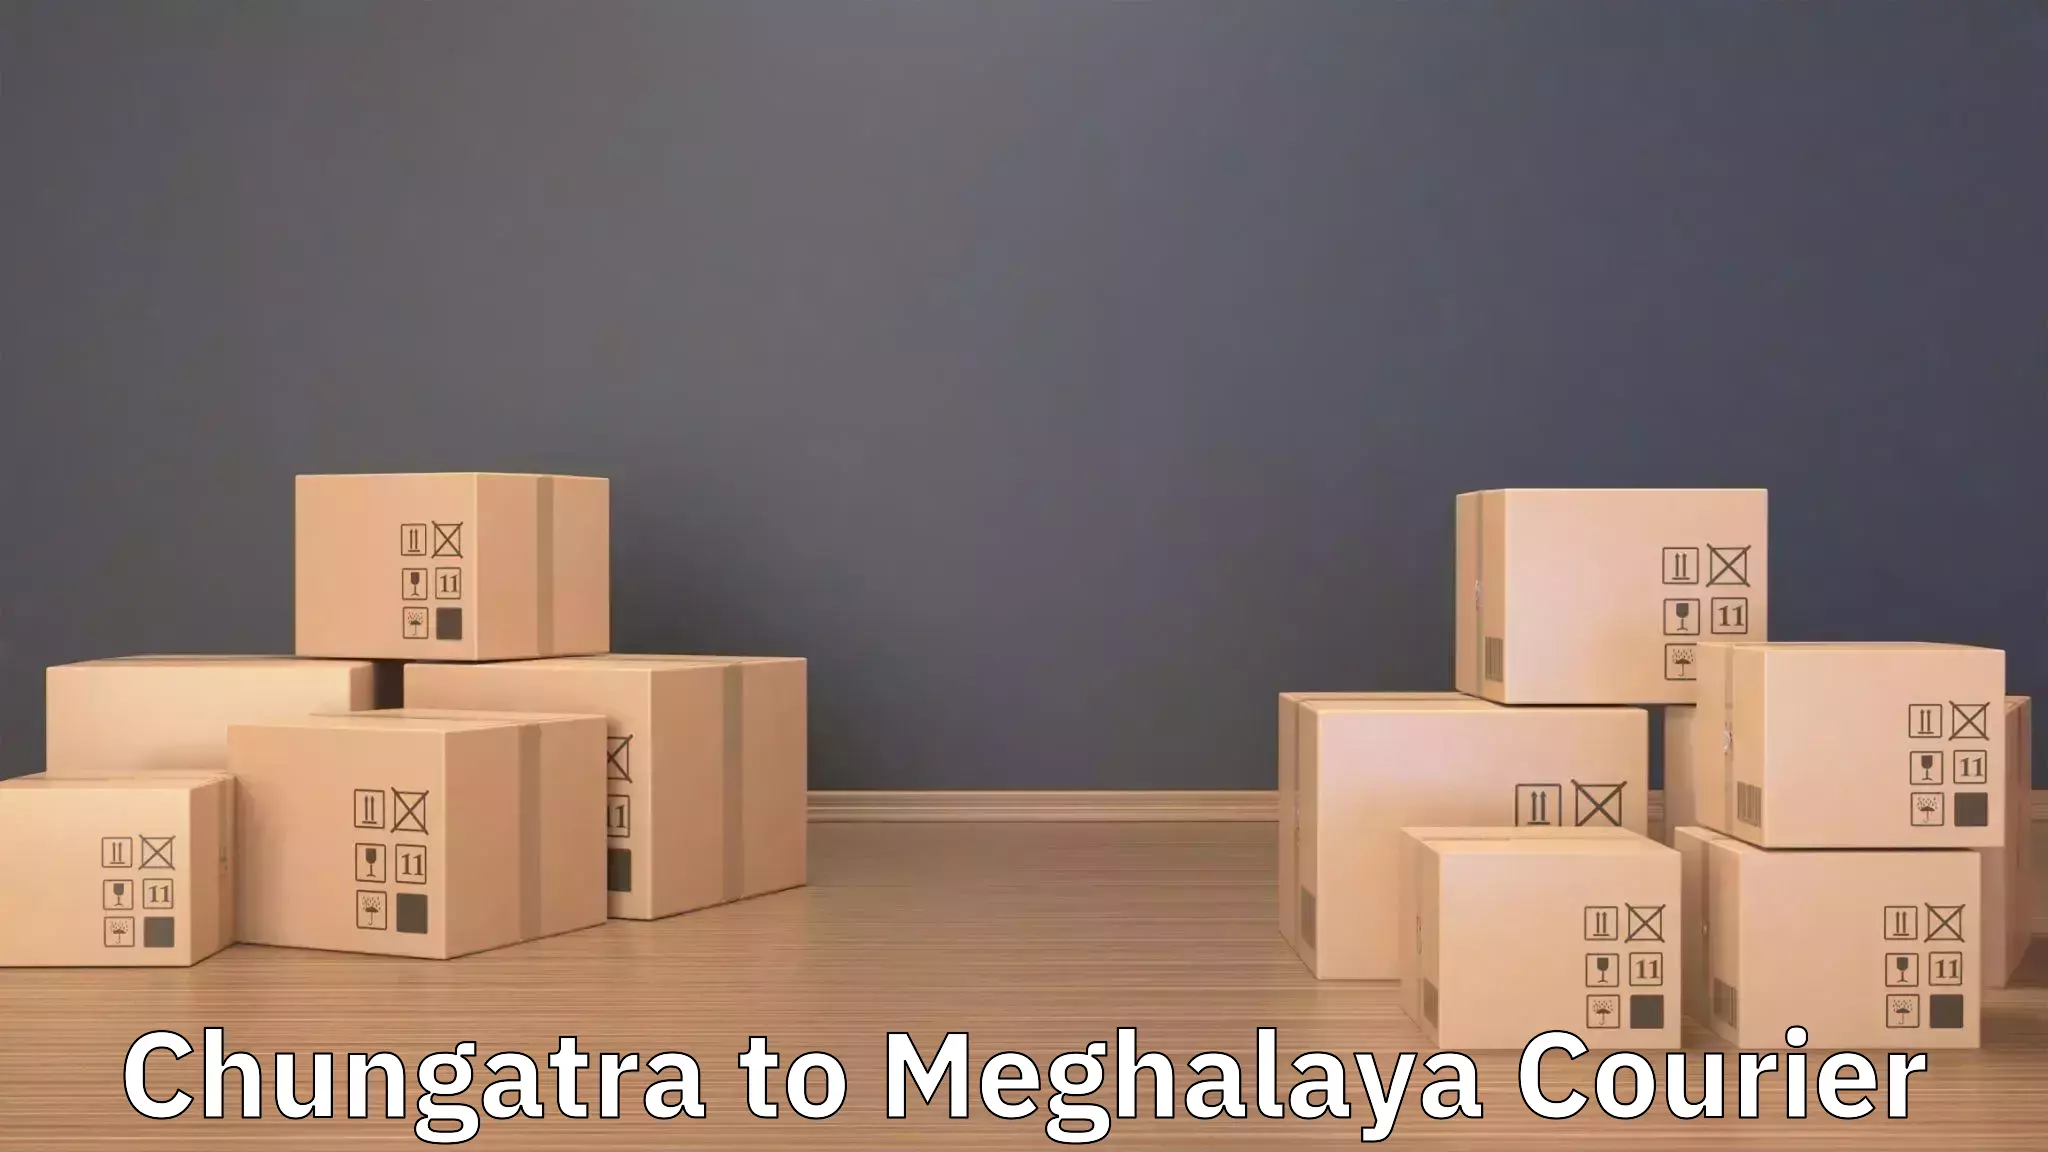 Moving and storage services Chungatra to Shillong